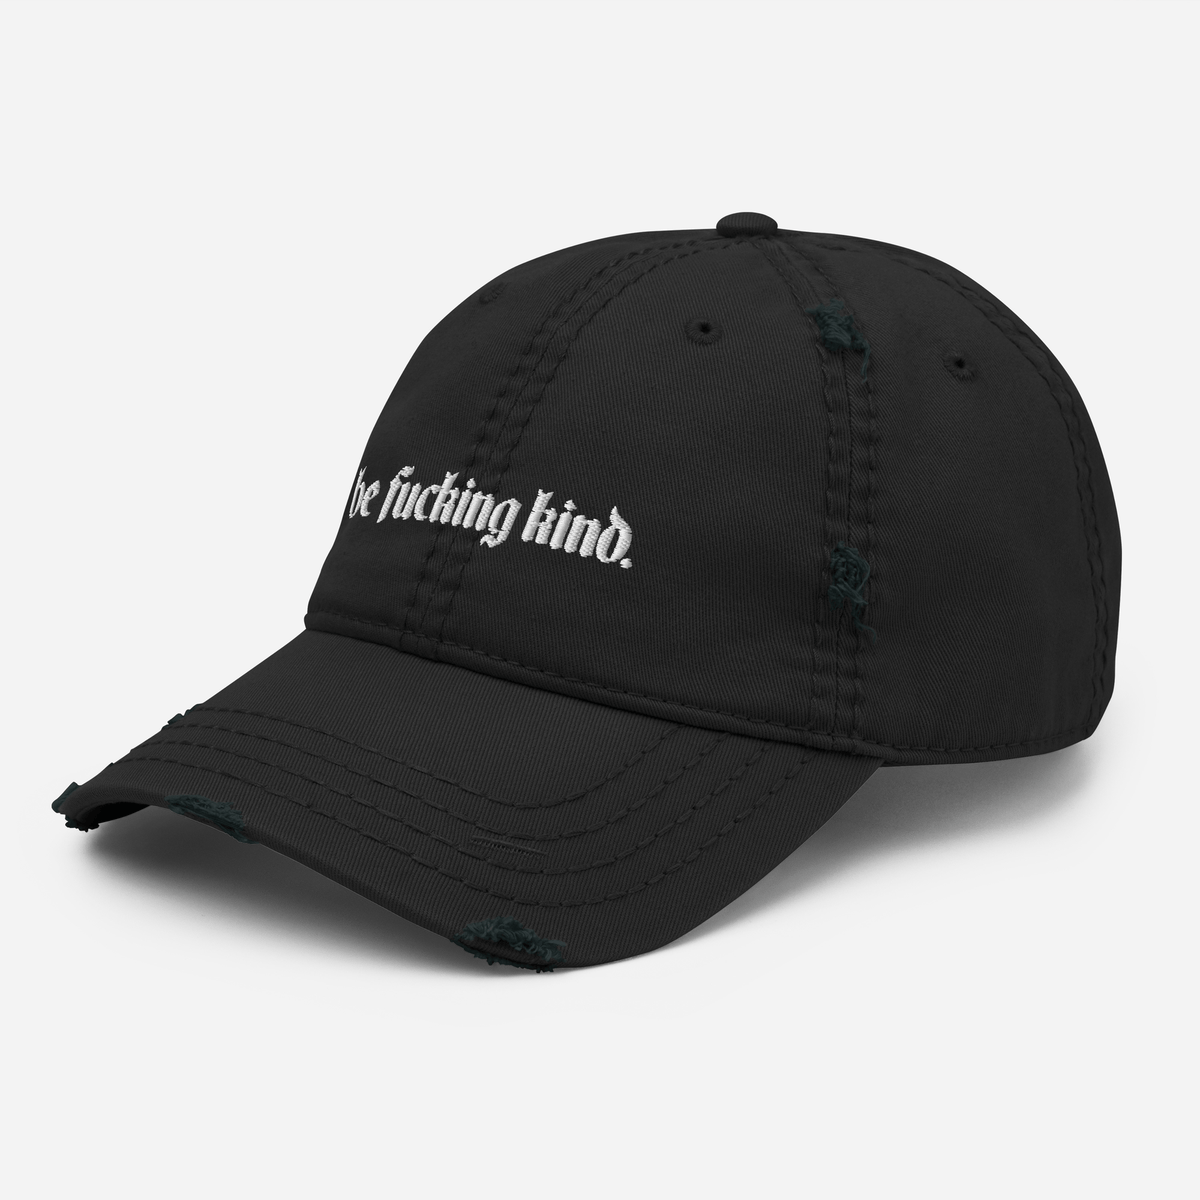 Be Fucking Kind Distressed Dad Hat - Goth Cloth Co.3920573_10990